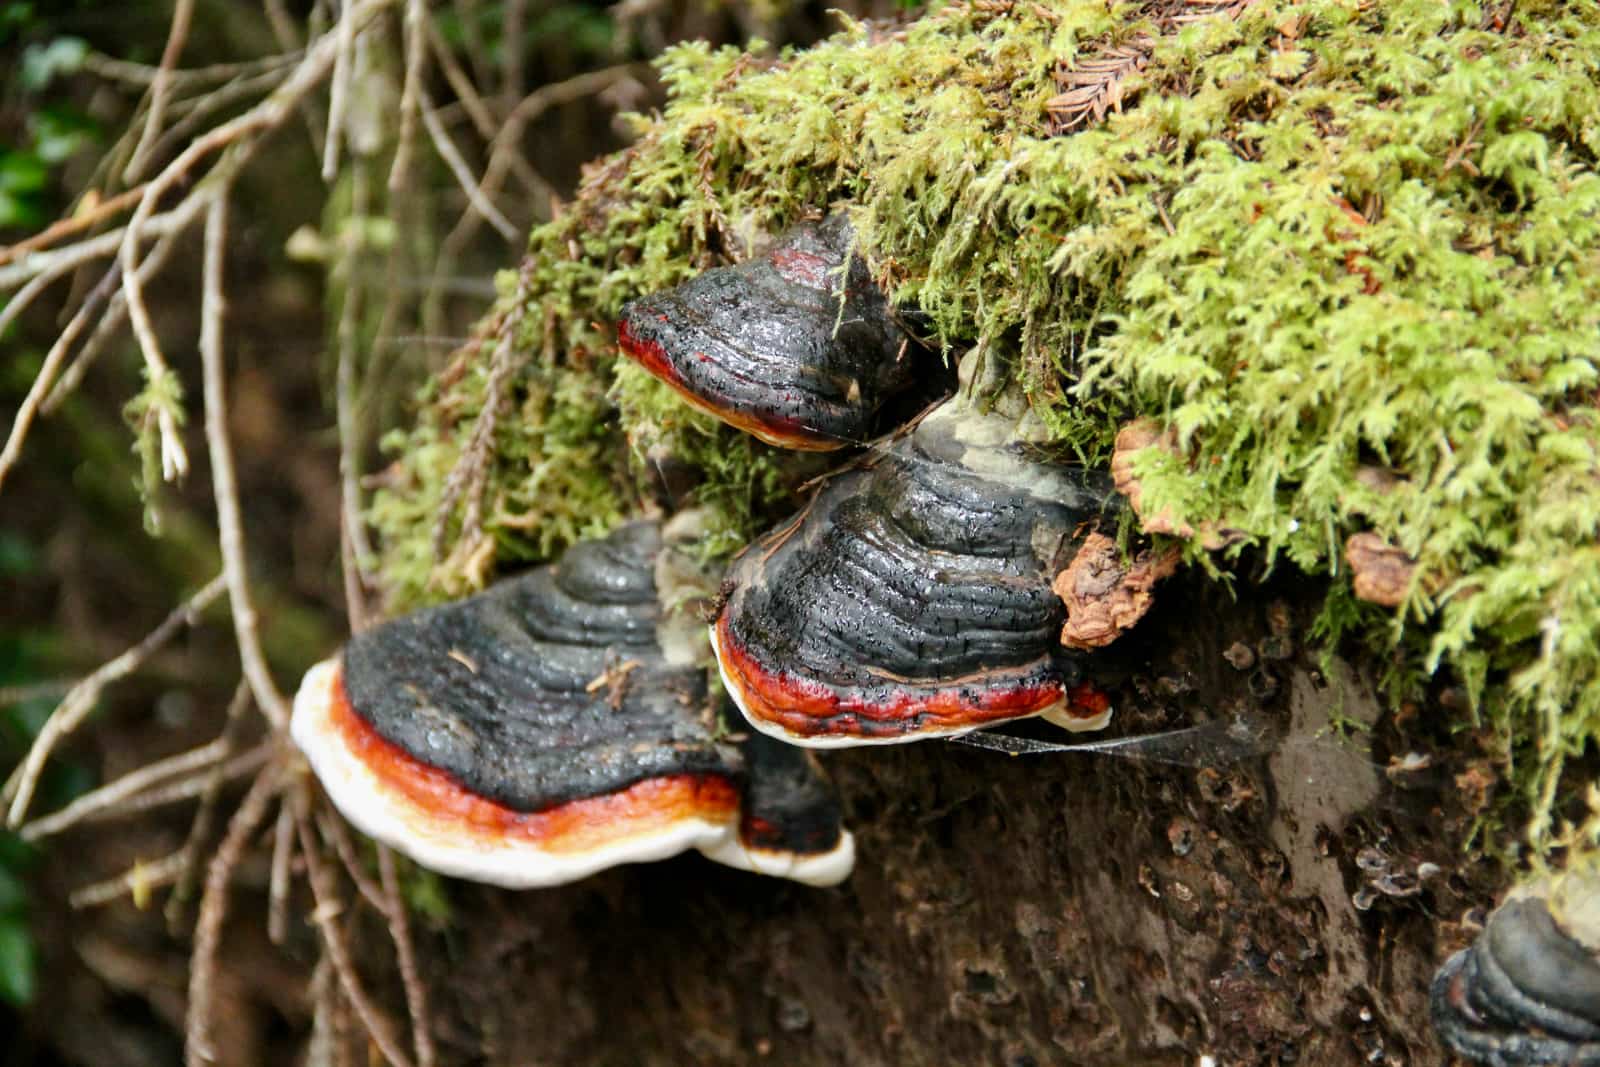 Black and red fungus growing on tree